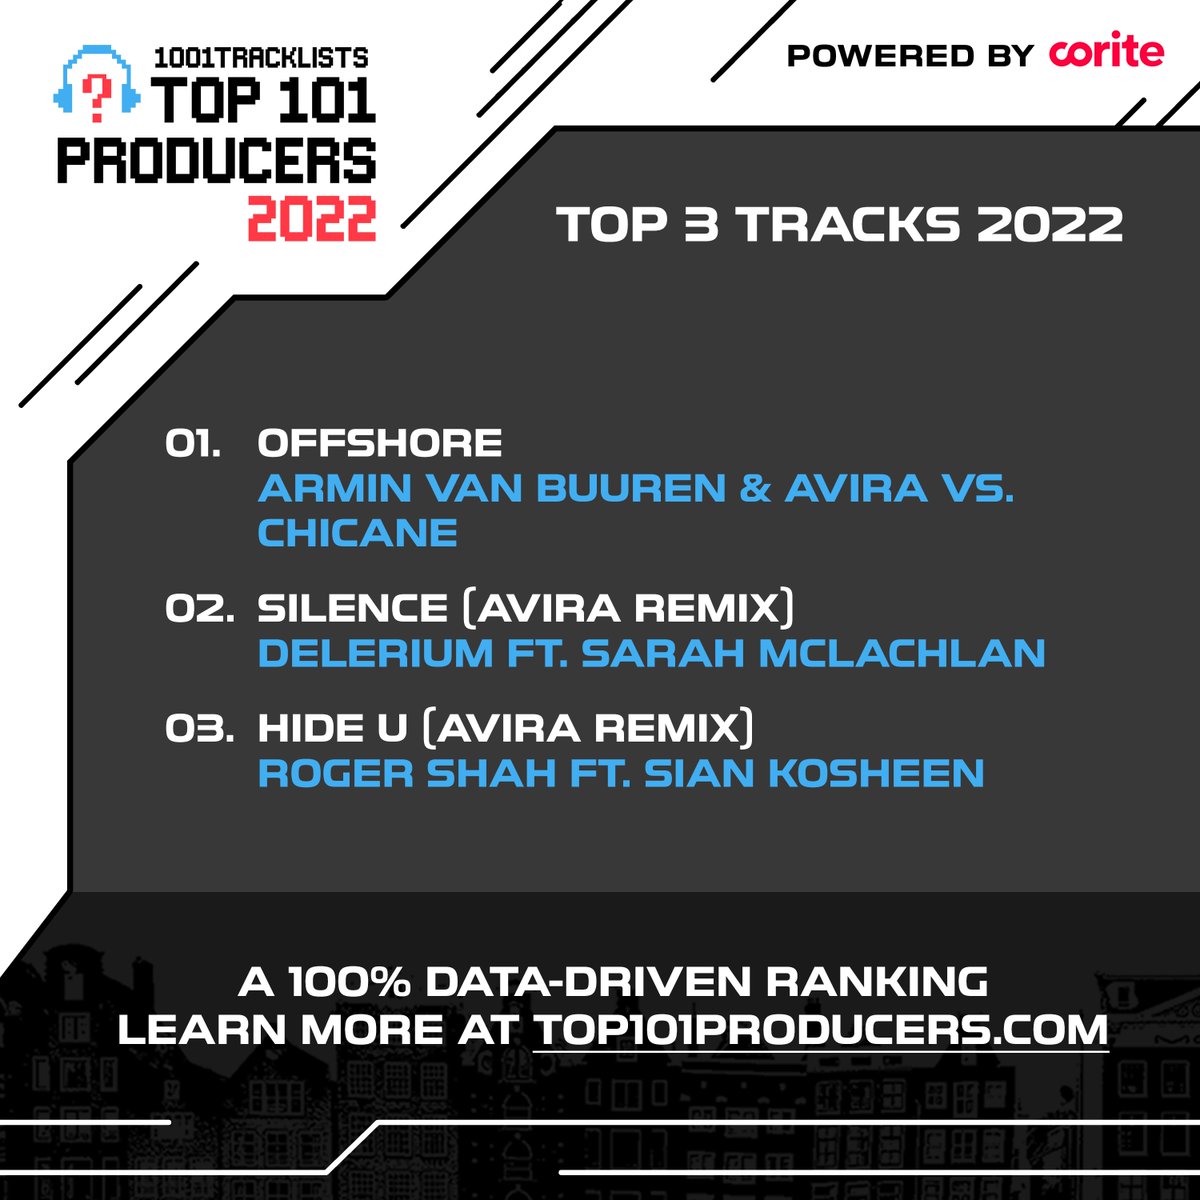 Making his third straight appearance in the rankings, Canadian producer @aviraaudio unleashed a hit rework of @NickChicane's 'Offshore' together with @arminvanbuuren en route to a #59 finish in the #Top101Producers2022.